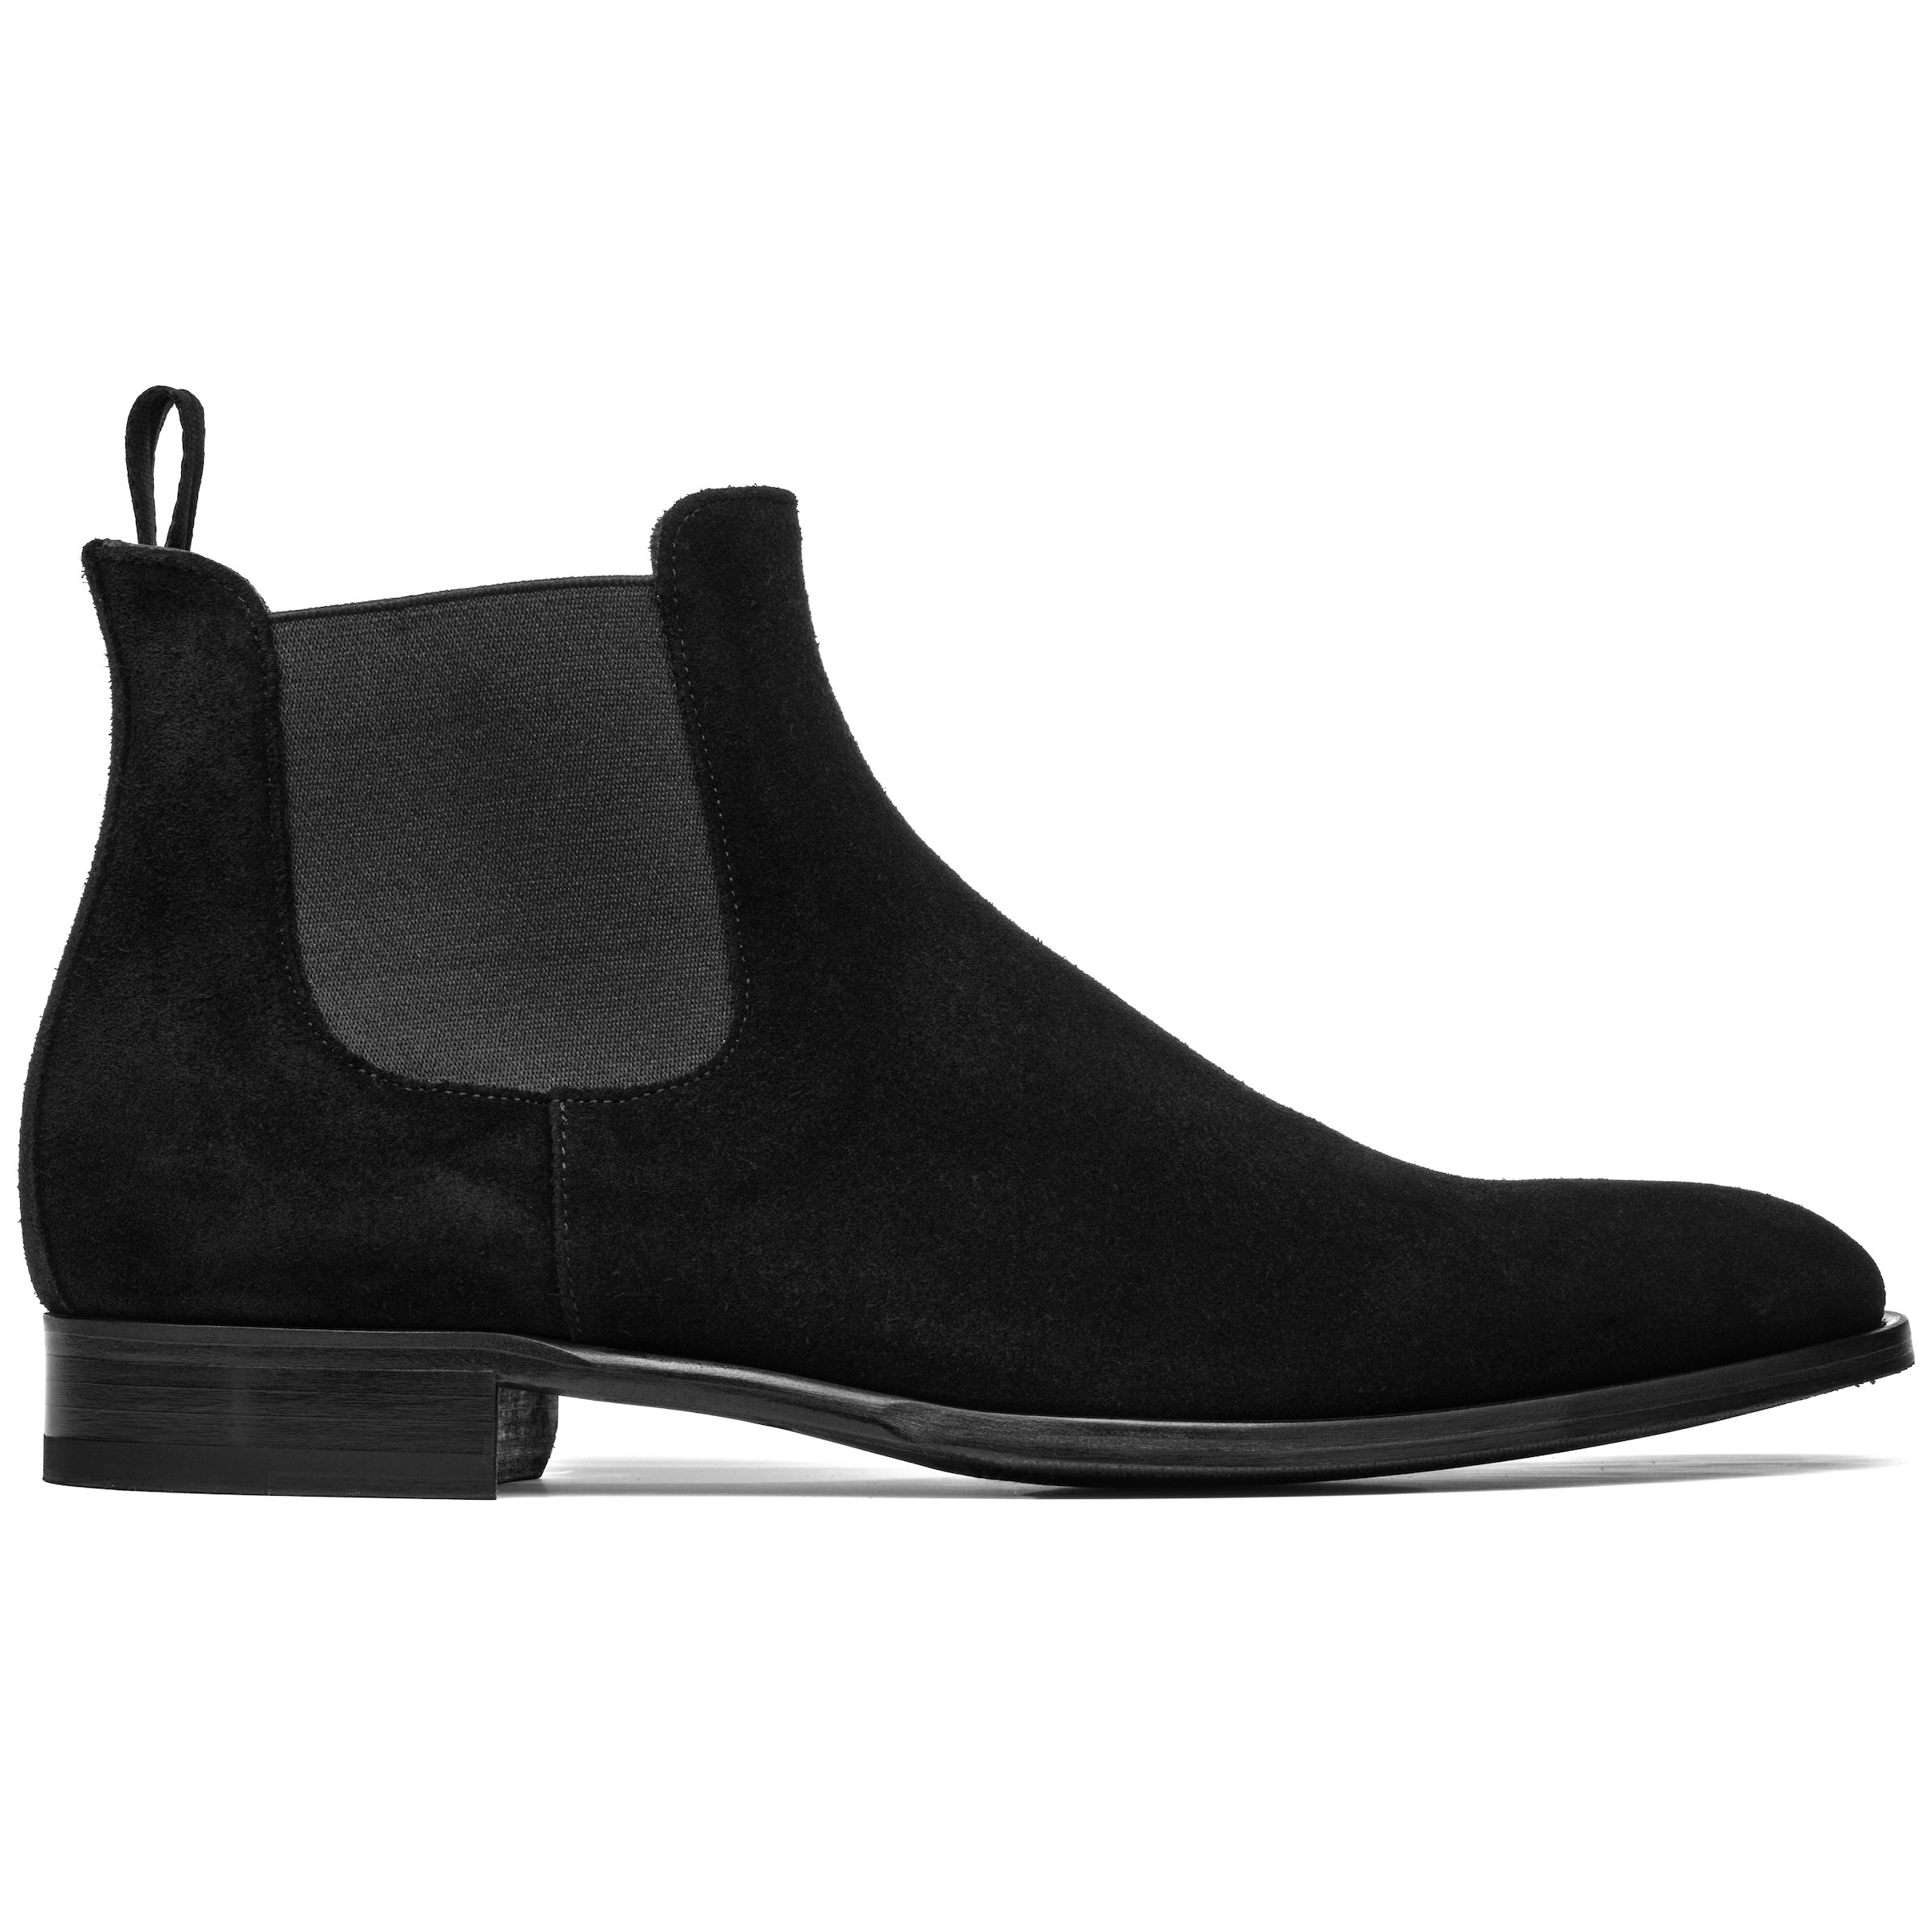 Shelby Black Suede Chelsea Boot